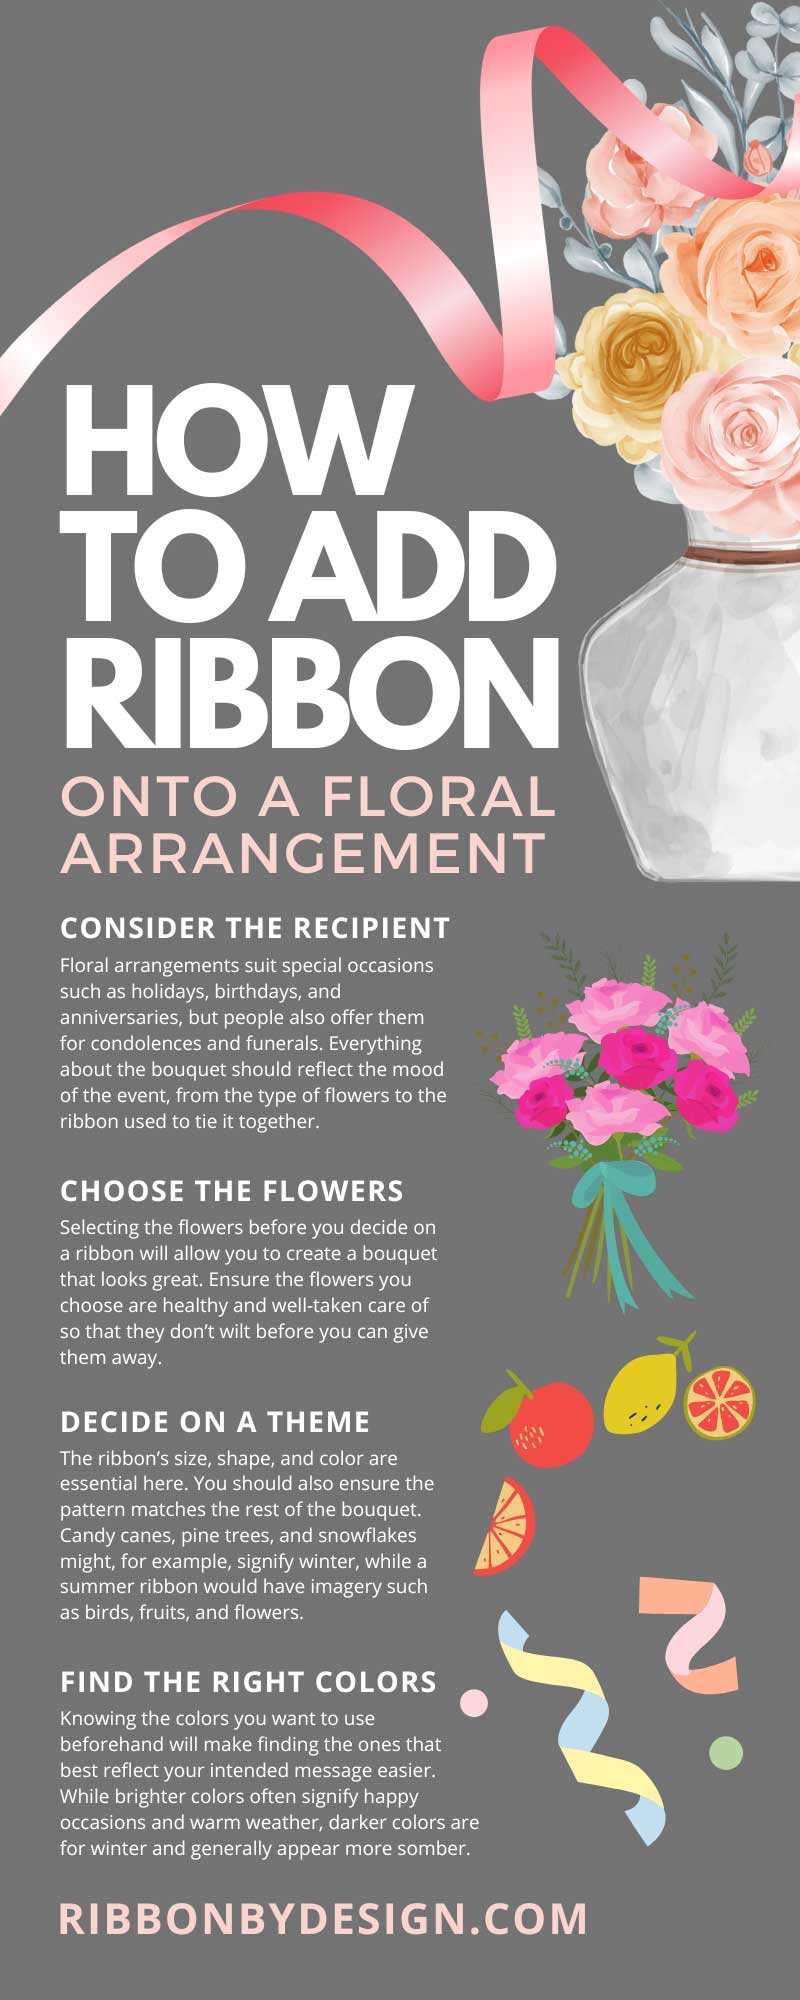 how to add a ribbon to flower bouquet｜TikTok Search